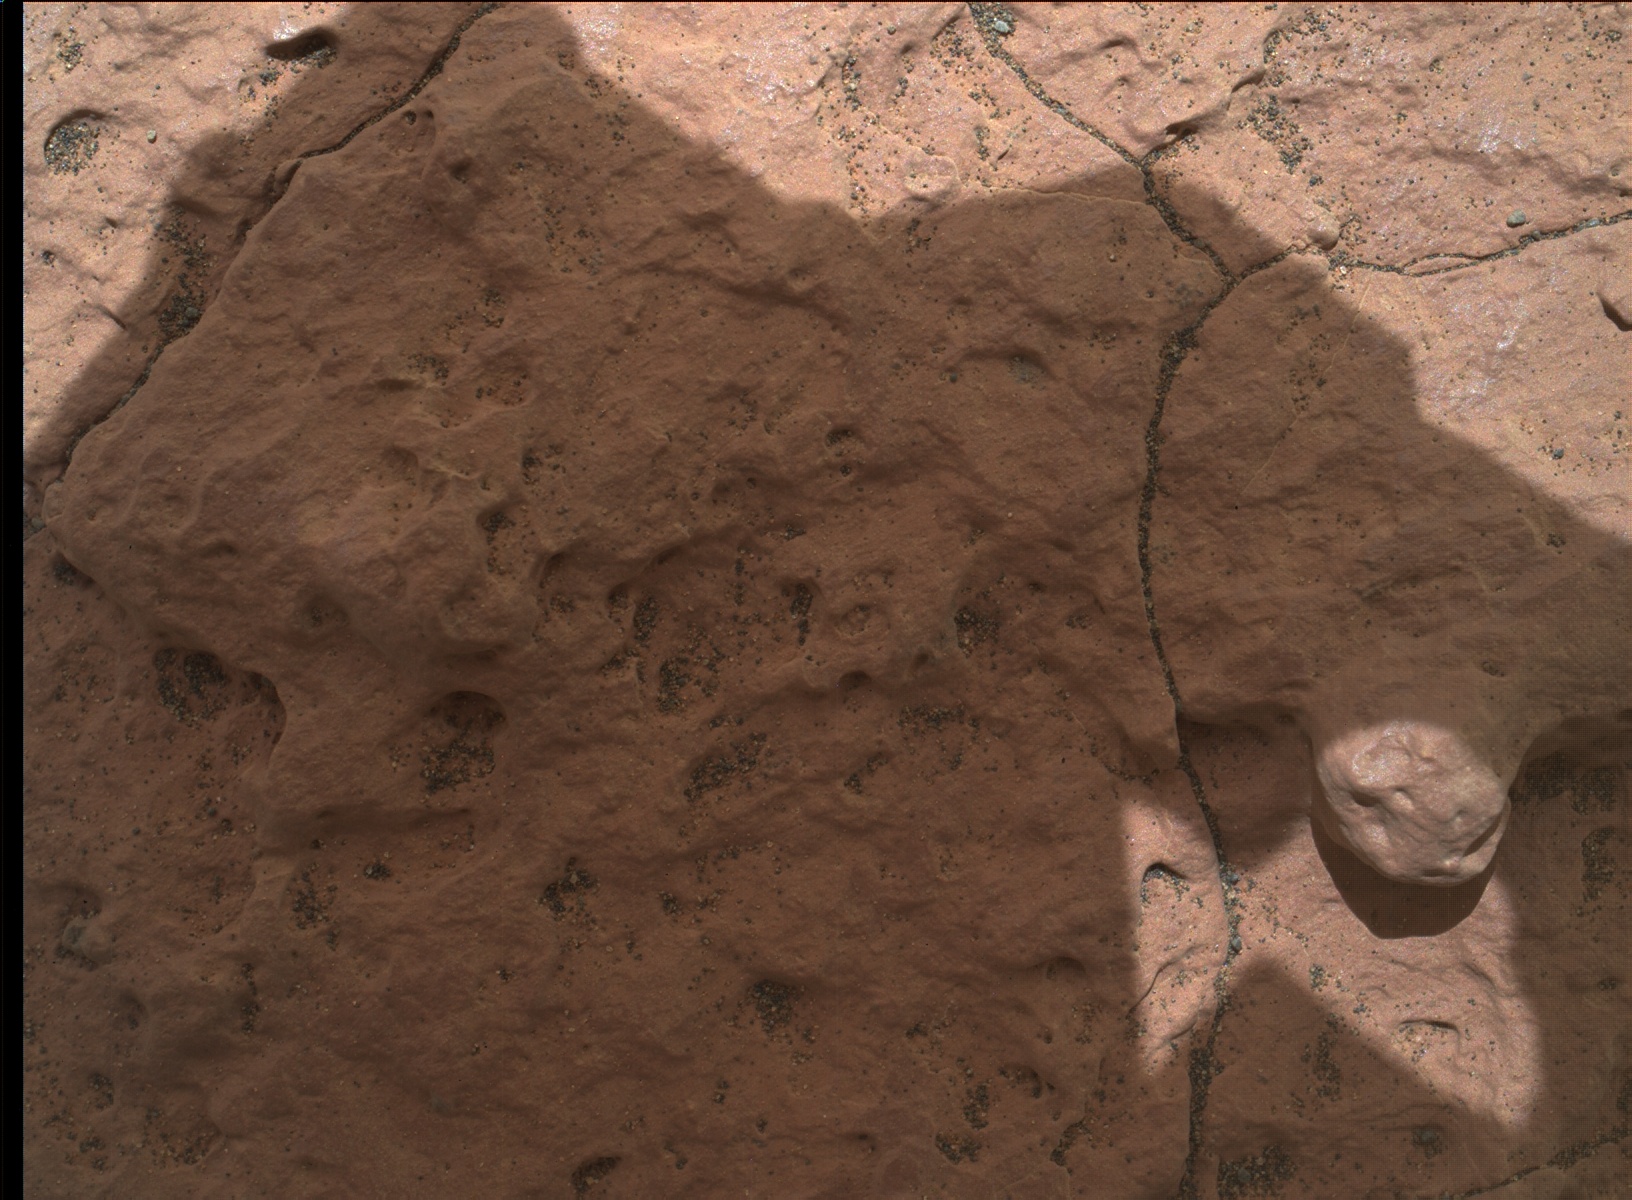 Nasa's Mars rover Curiosity acquired this image using its Mars Hand Lens Imager (MAHLI) on Sol 1577